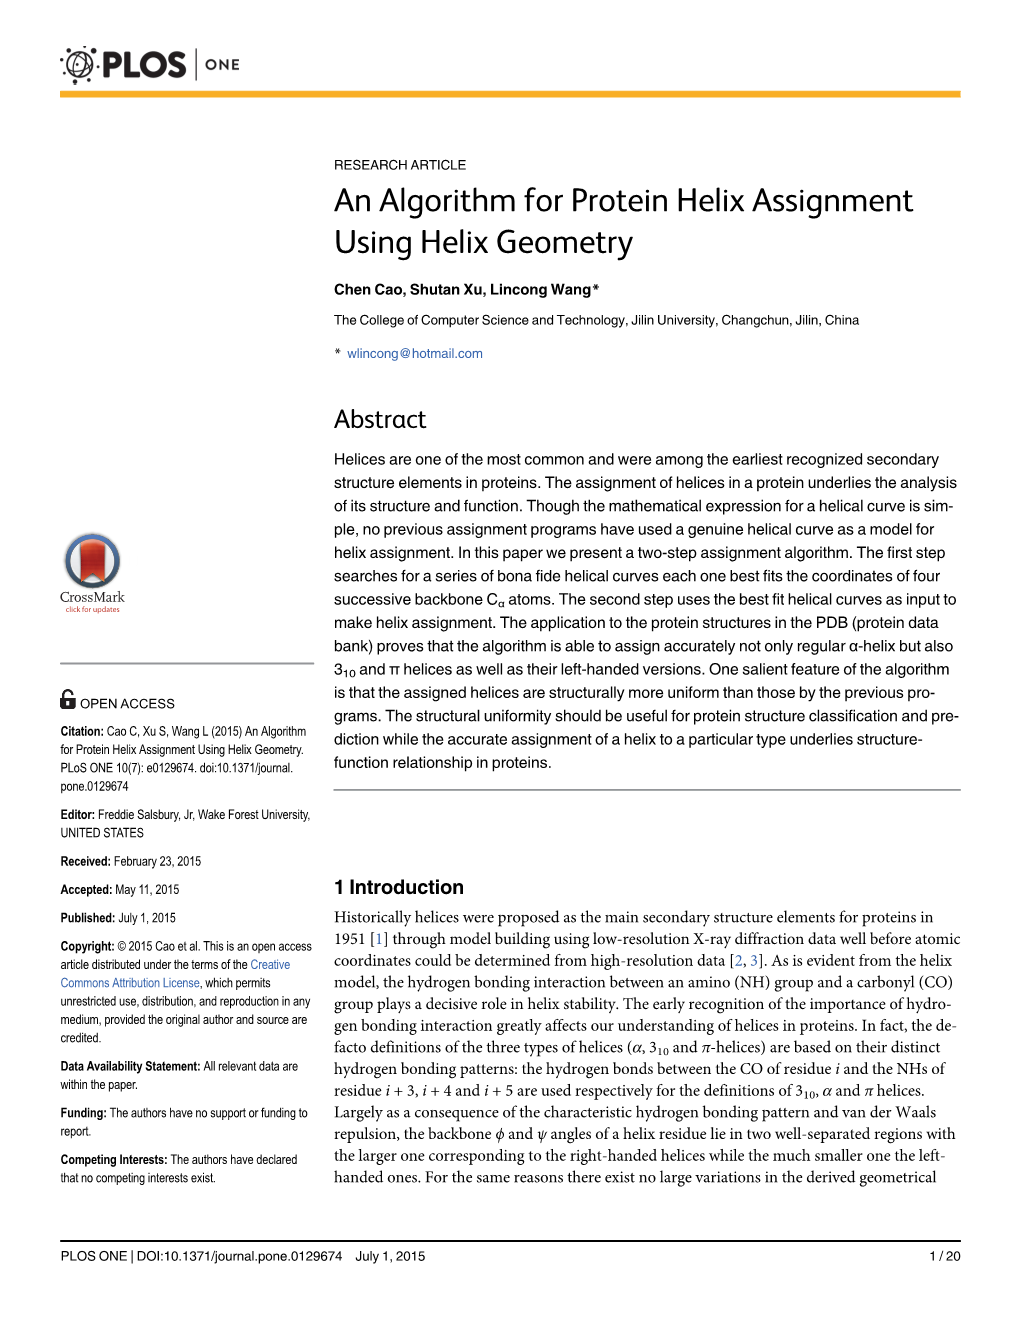 An Algorithm for Protein Helix Assignment Using Helix Geometry